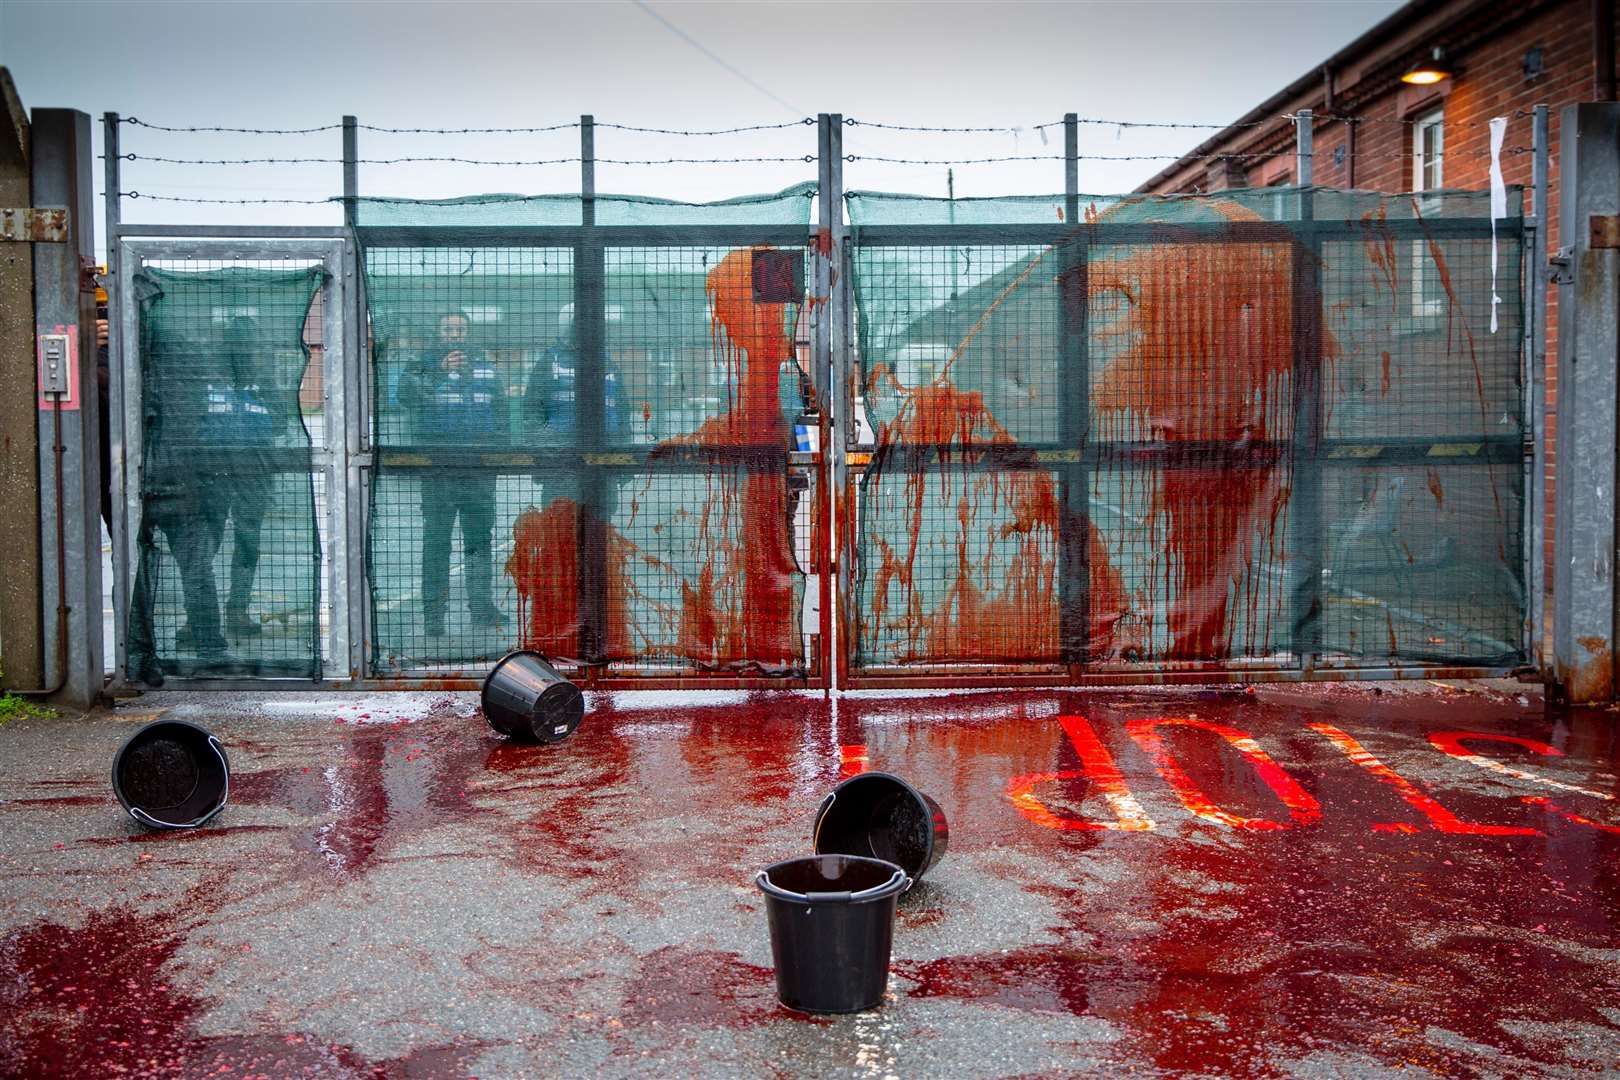 Activists threw fake blood at the gates on Thursday in protest to the arrangement at Napier Barracks. Photo by Andrew Aitchison